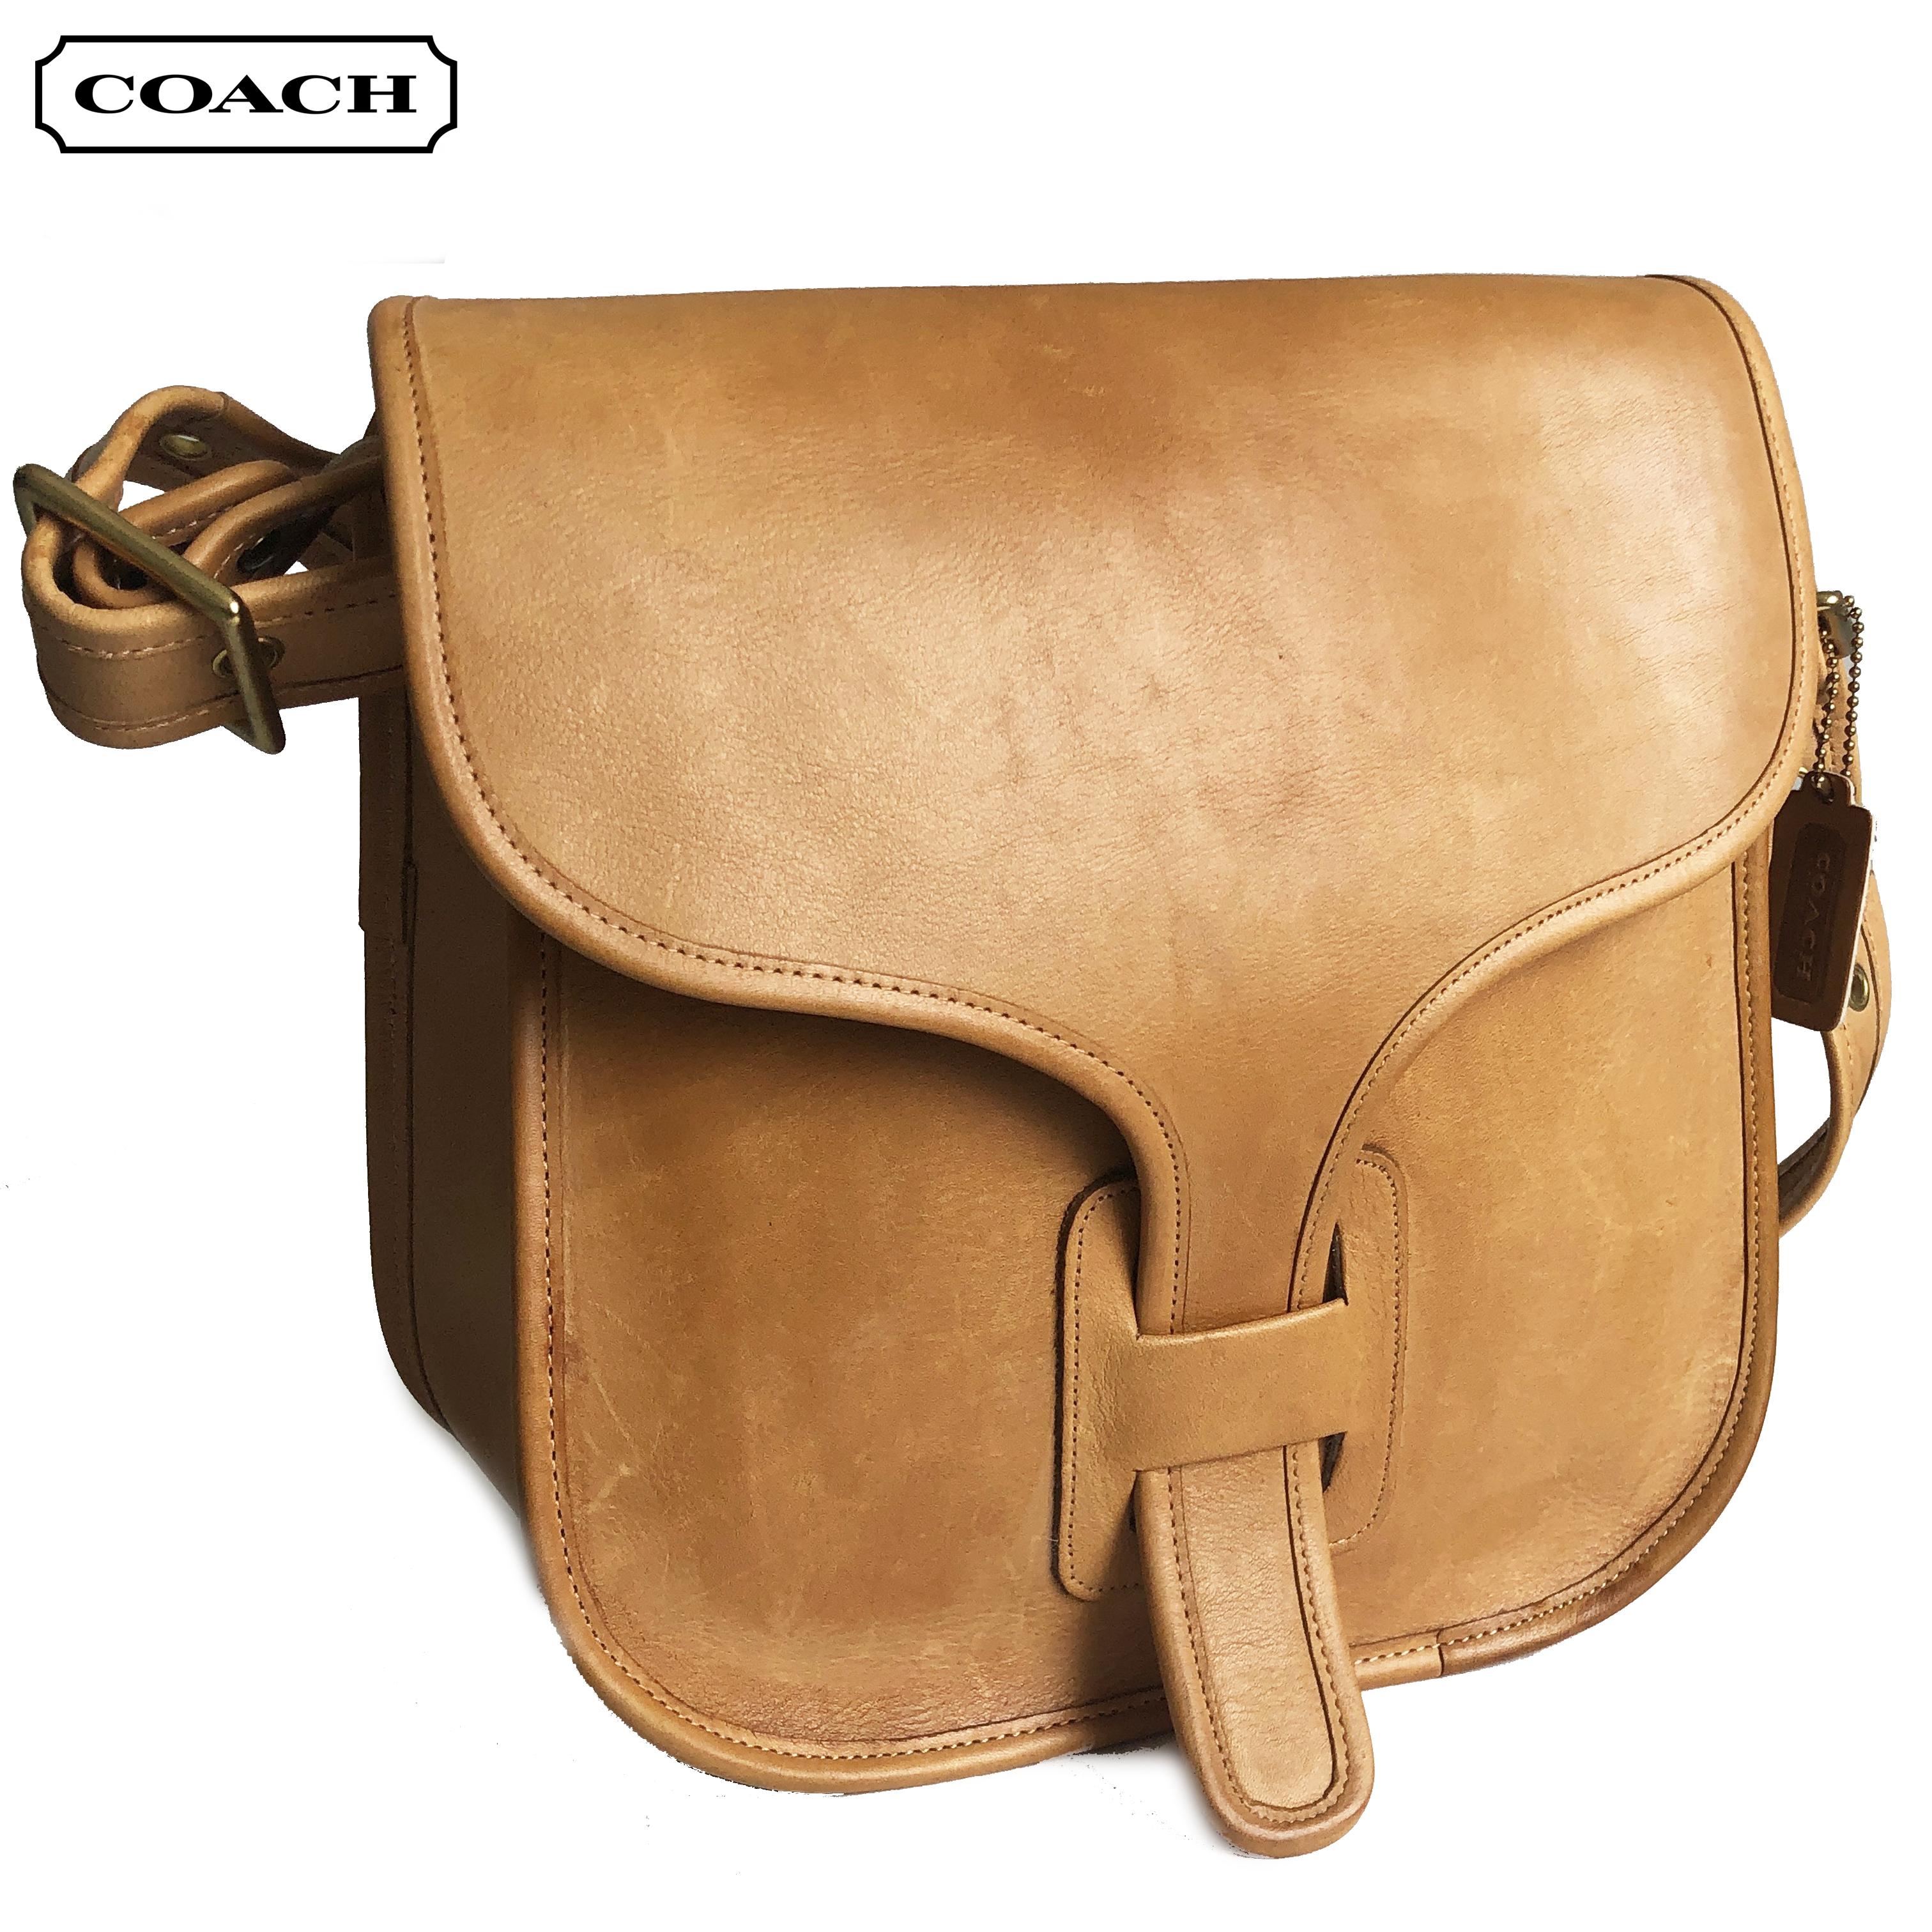 Authentic, preowned, vintage Coach Bag Large Courier Saddle Tan Leather, made in NYC. Pre style creed; later called style 8920. Unlined w/1 zip pocket. Preowned/vintage, this bag is super clean (which we RARELY say), w/some fingernail scratches,